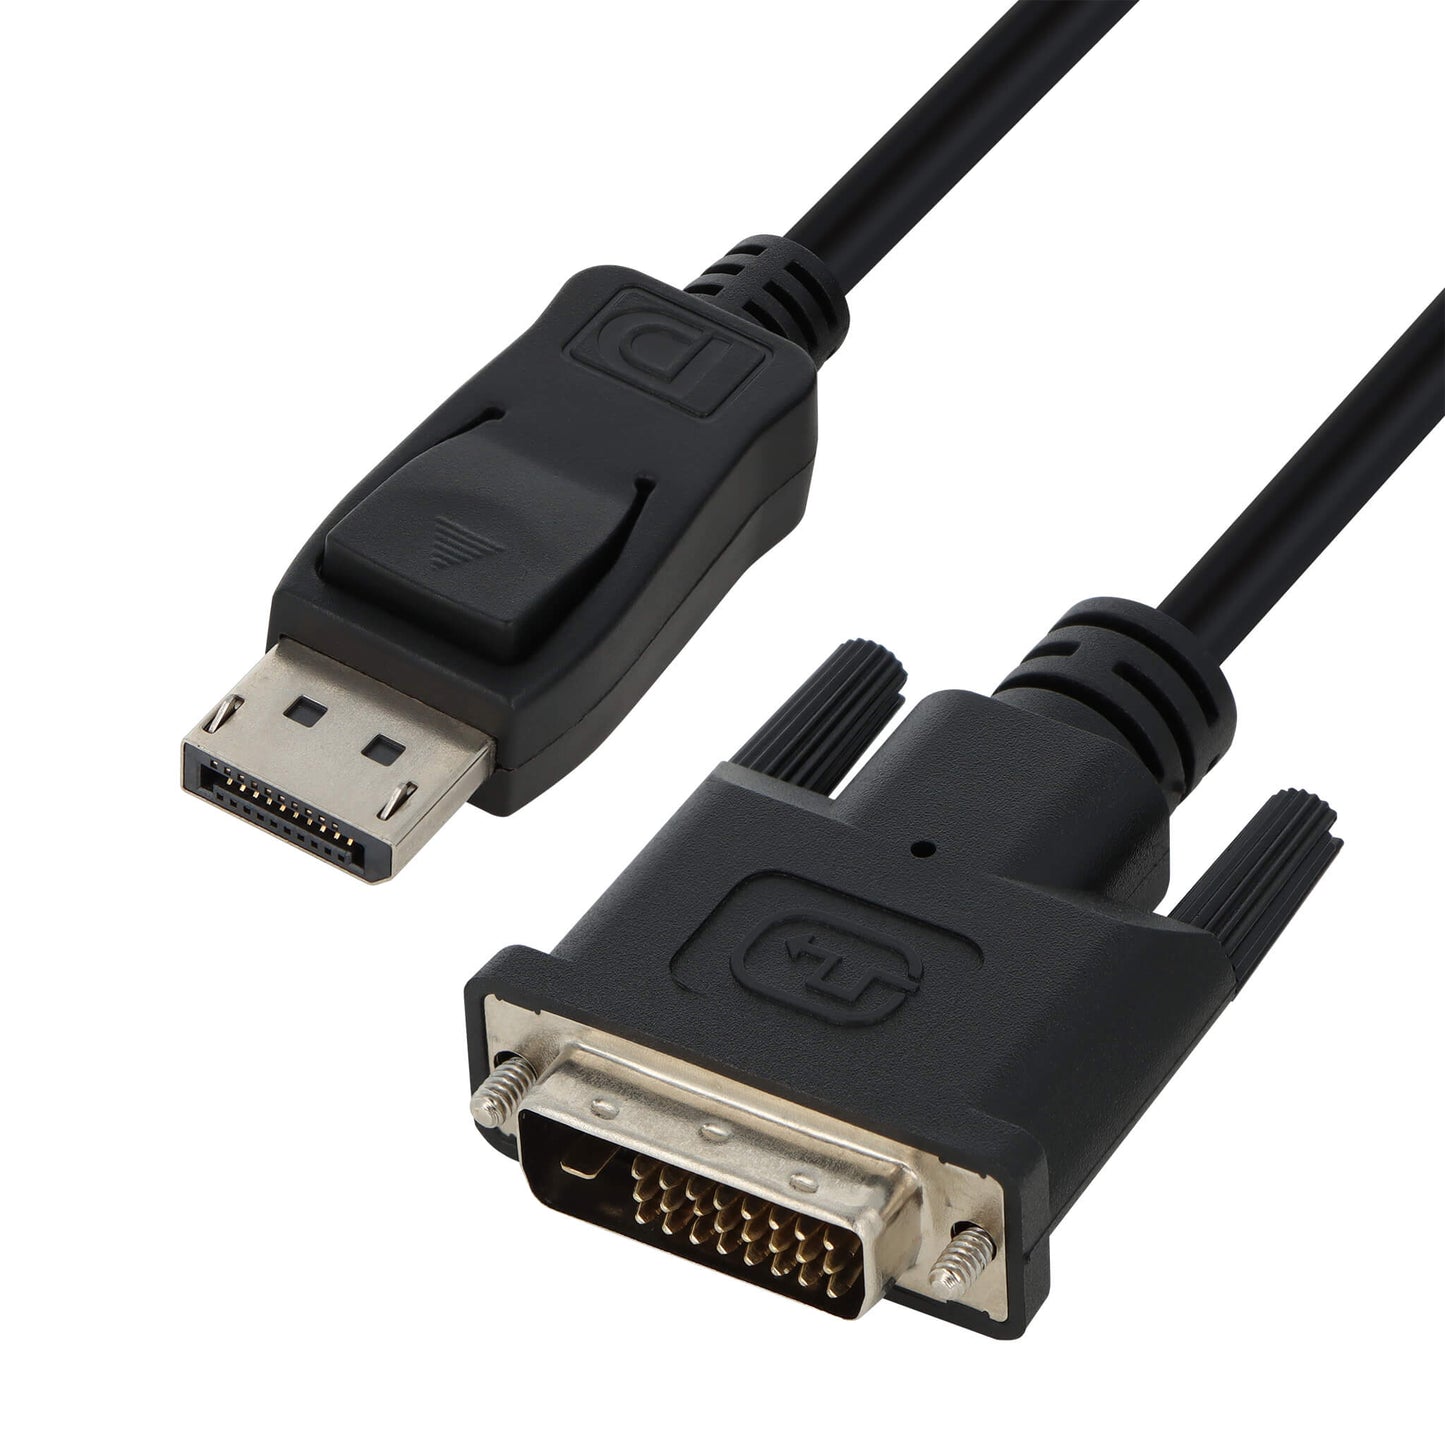 dvi cables are all the same